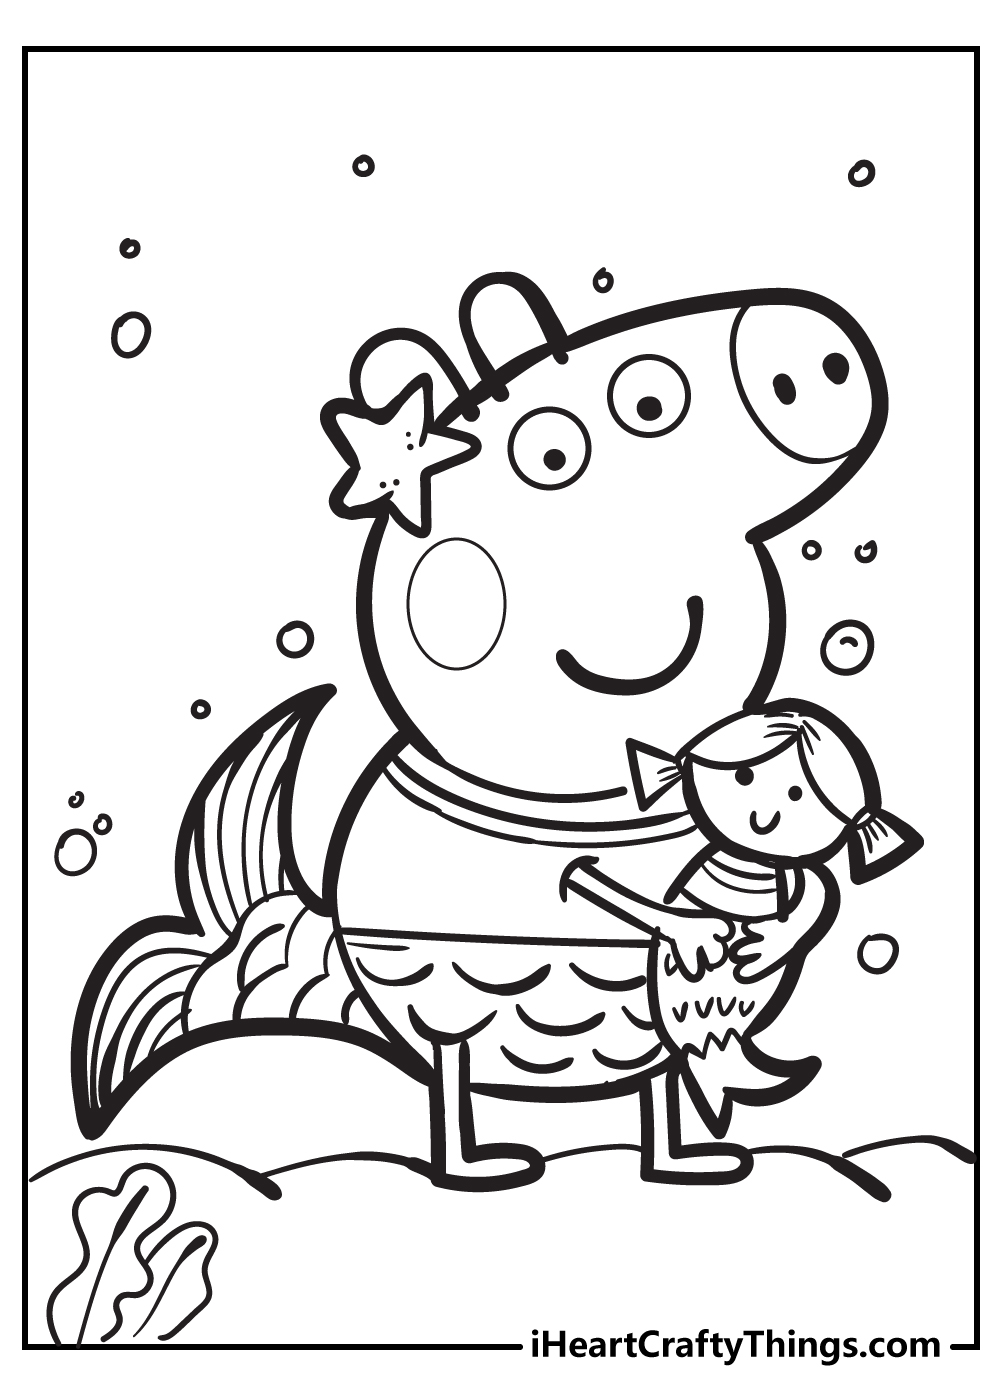 Peppa Pig coloring pages for adults free printable